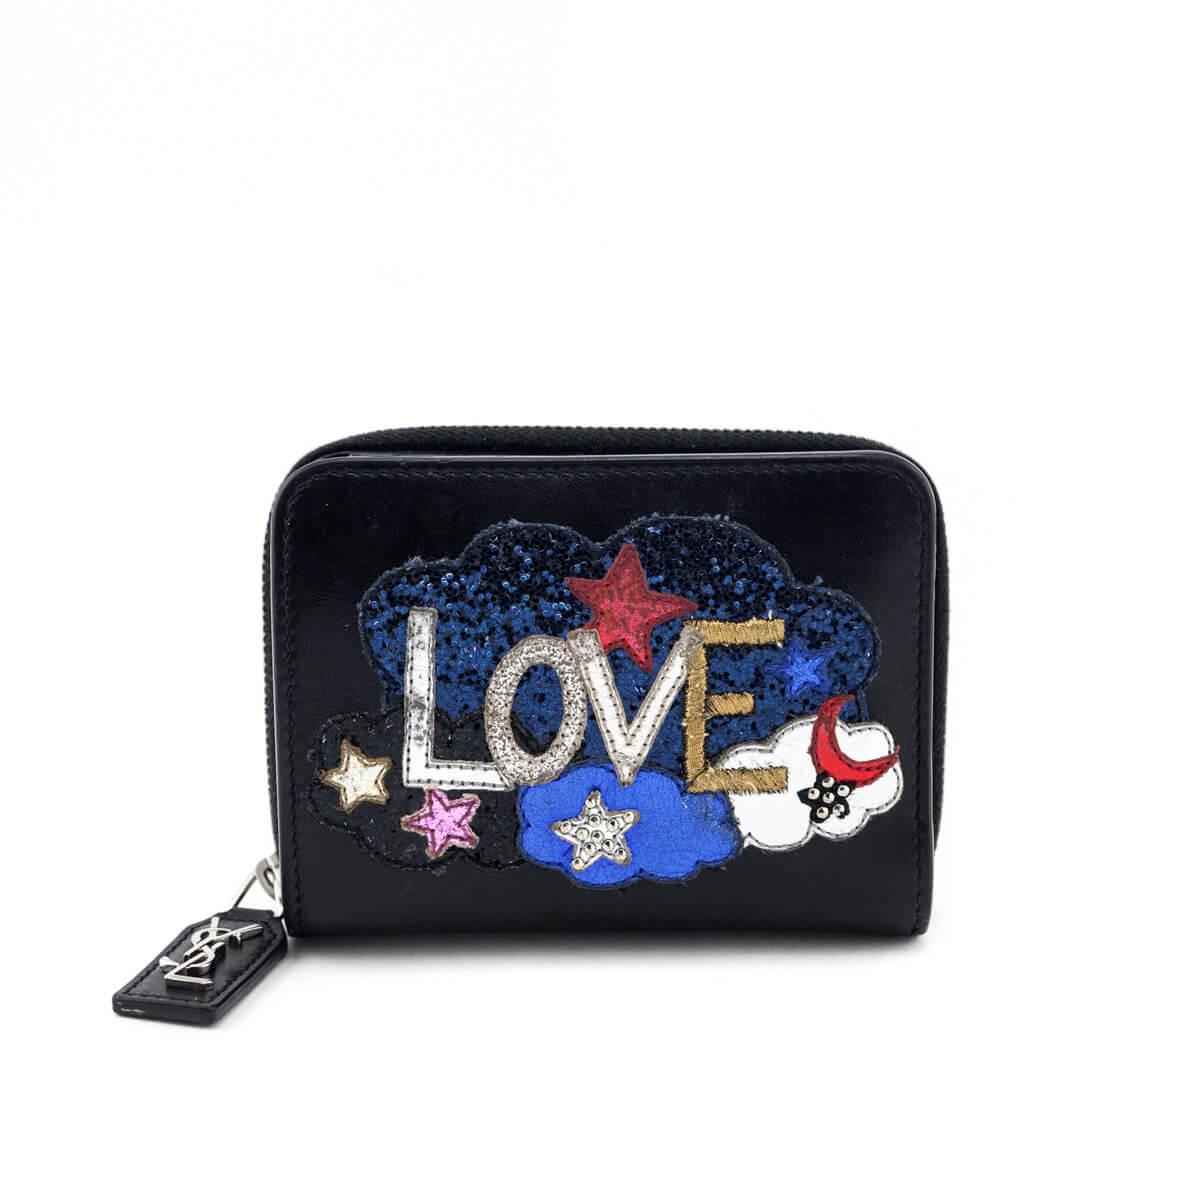 Saint Laurent Black Calfskin Love Patch Zipped Compact Wallet - Love that Bag etc - Preowned Authentic Designer Handbags & Preloved Fashions